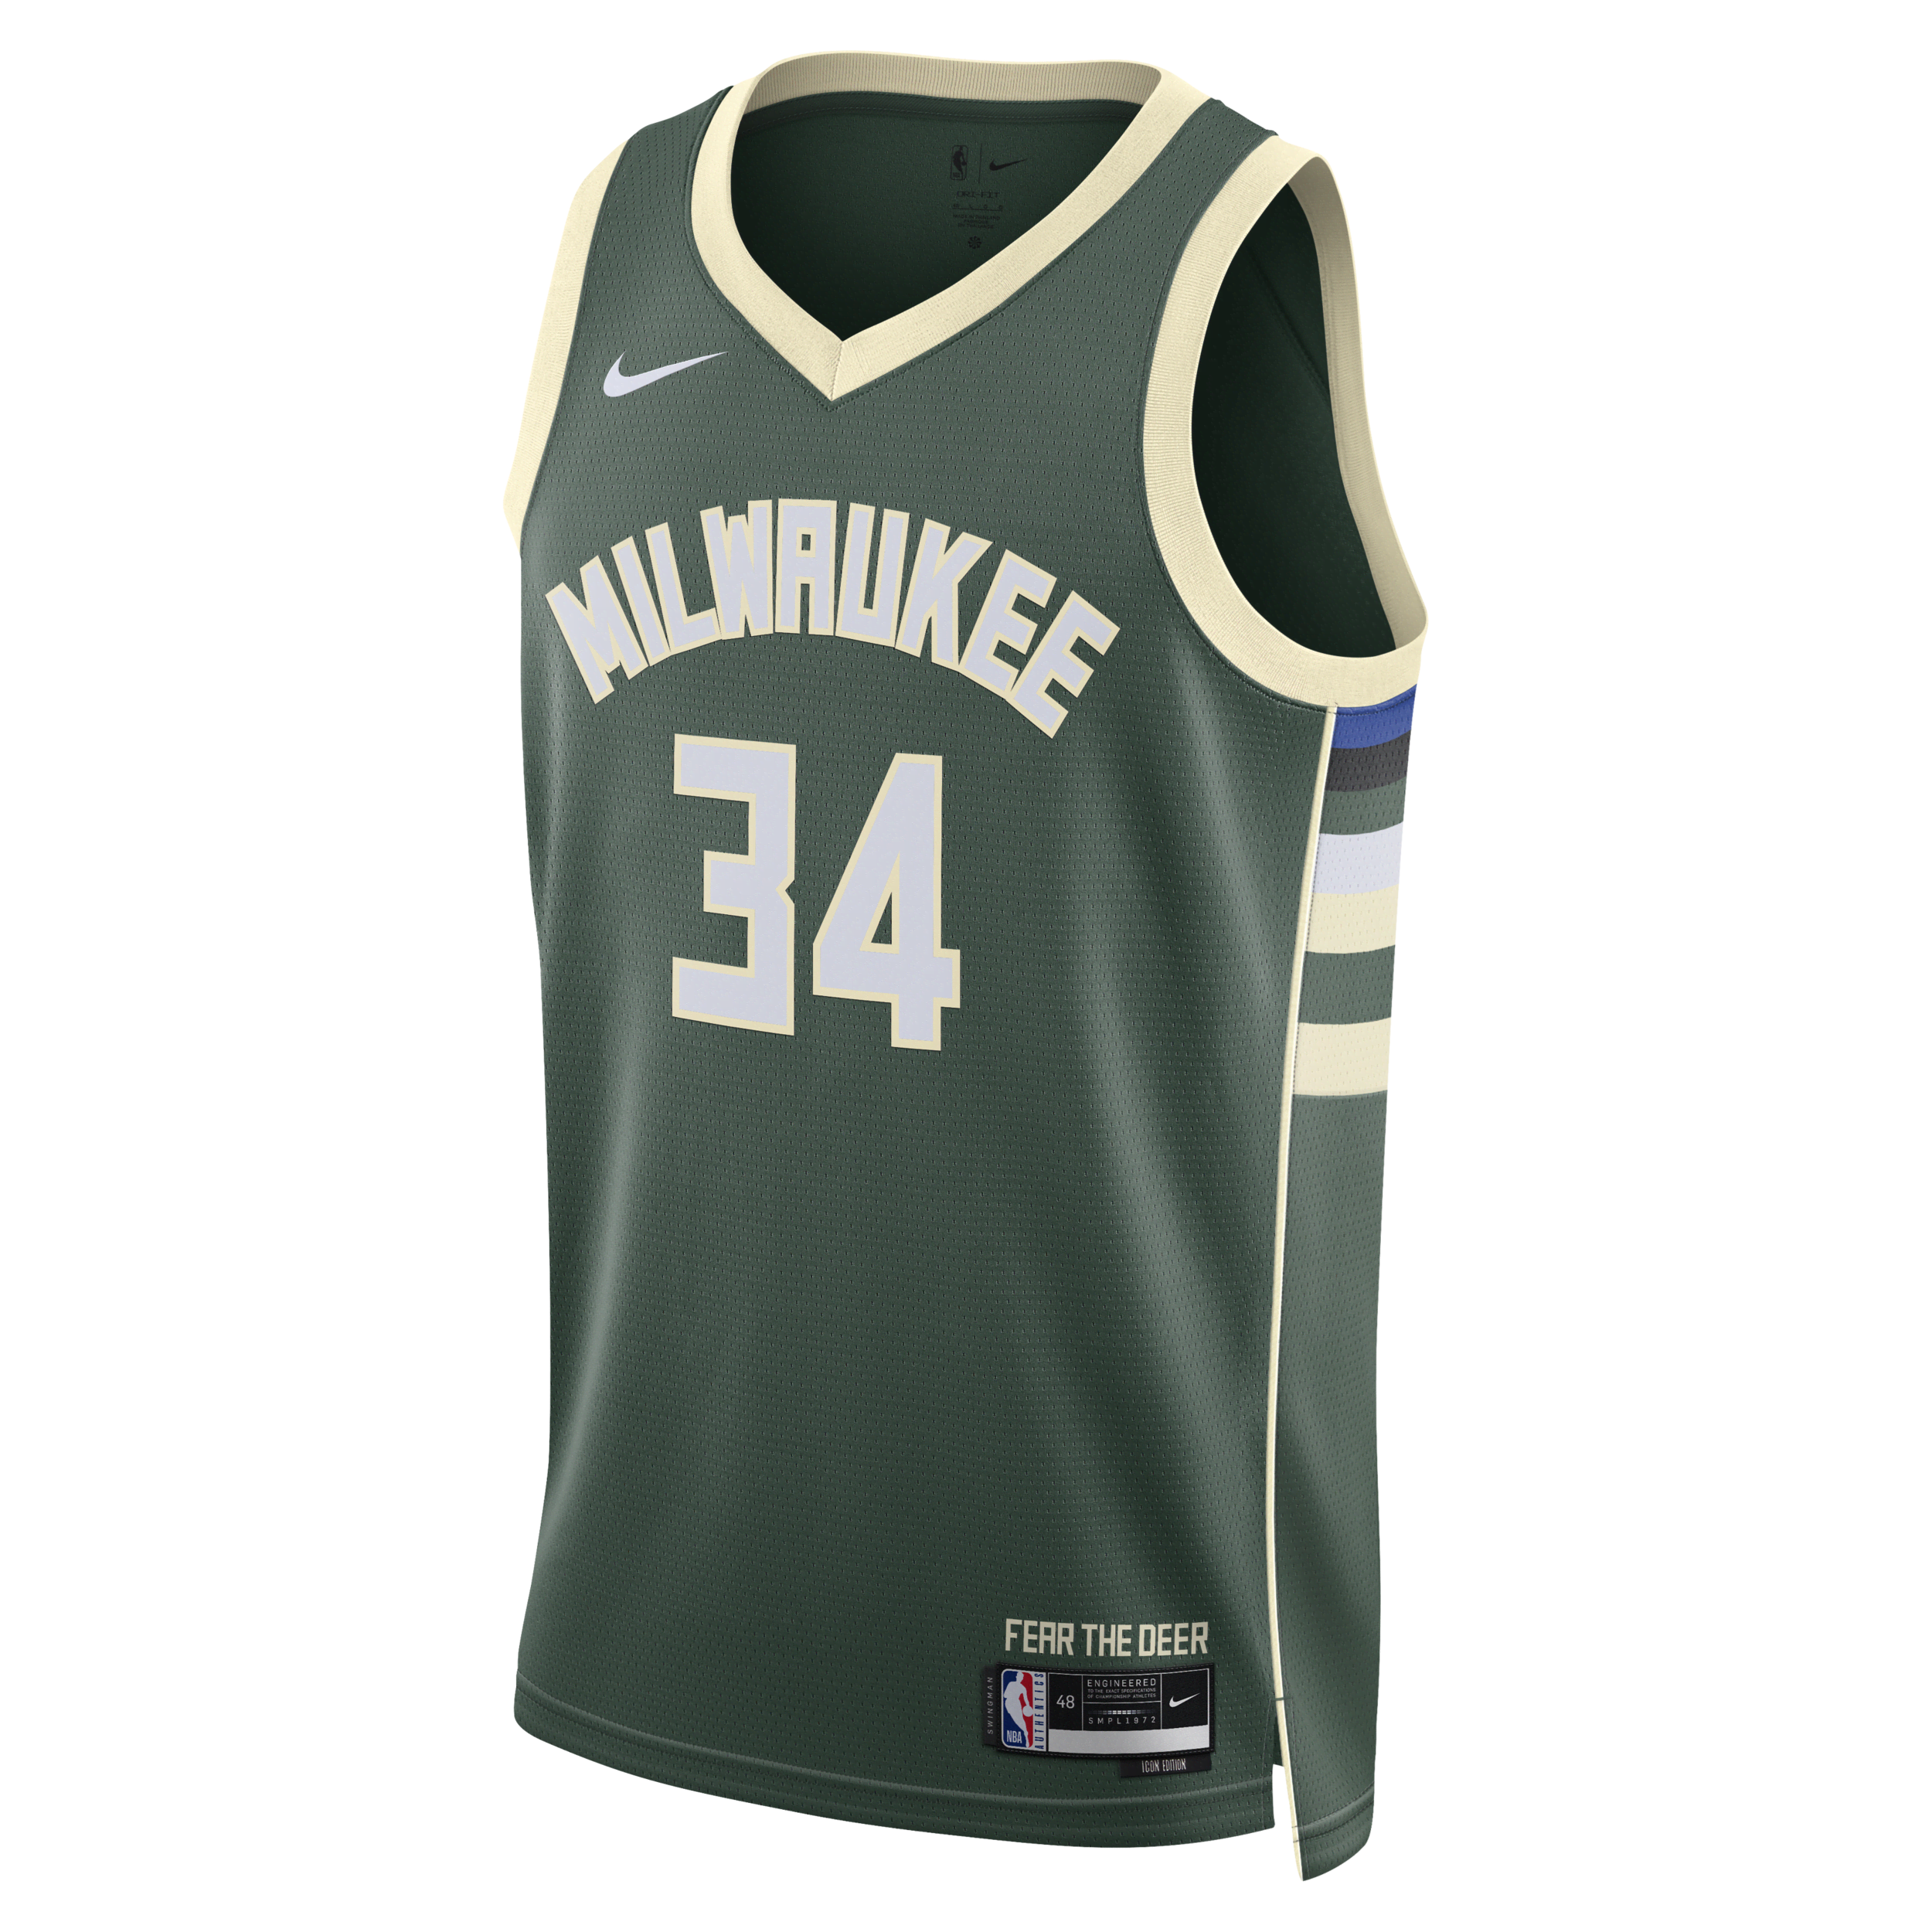 Milwaukee Bucks are NBA champions: Here's where to get your gear